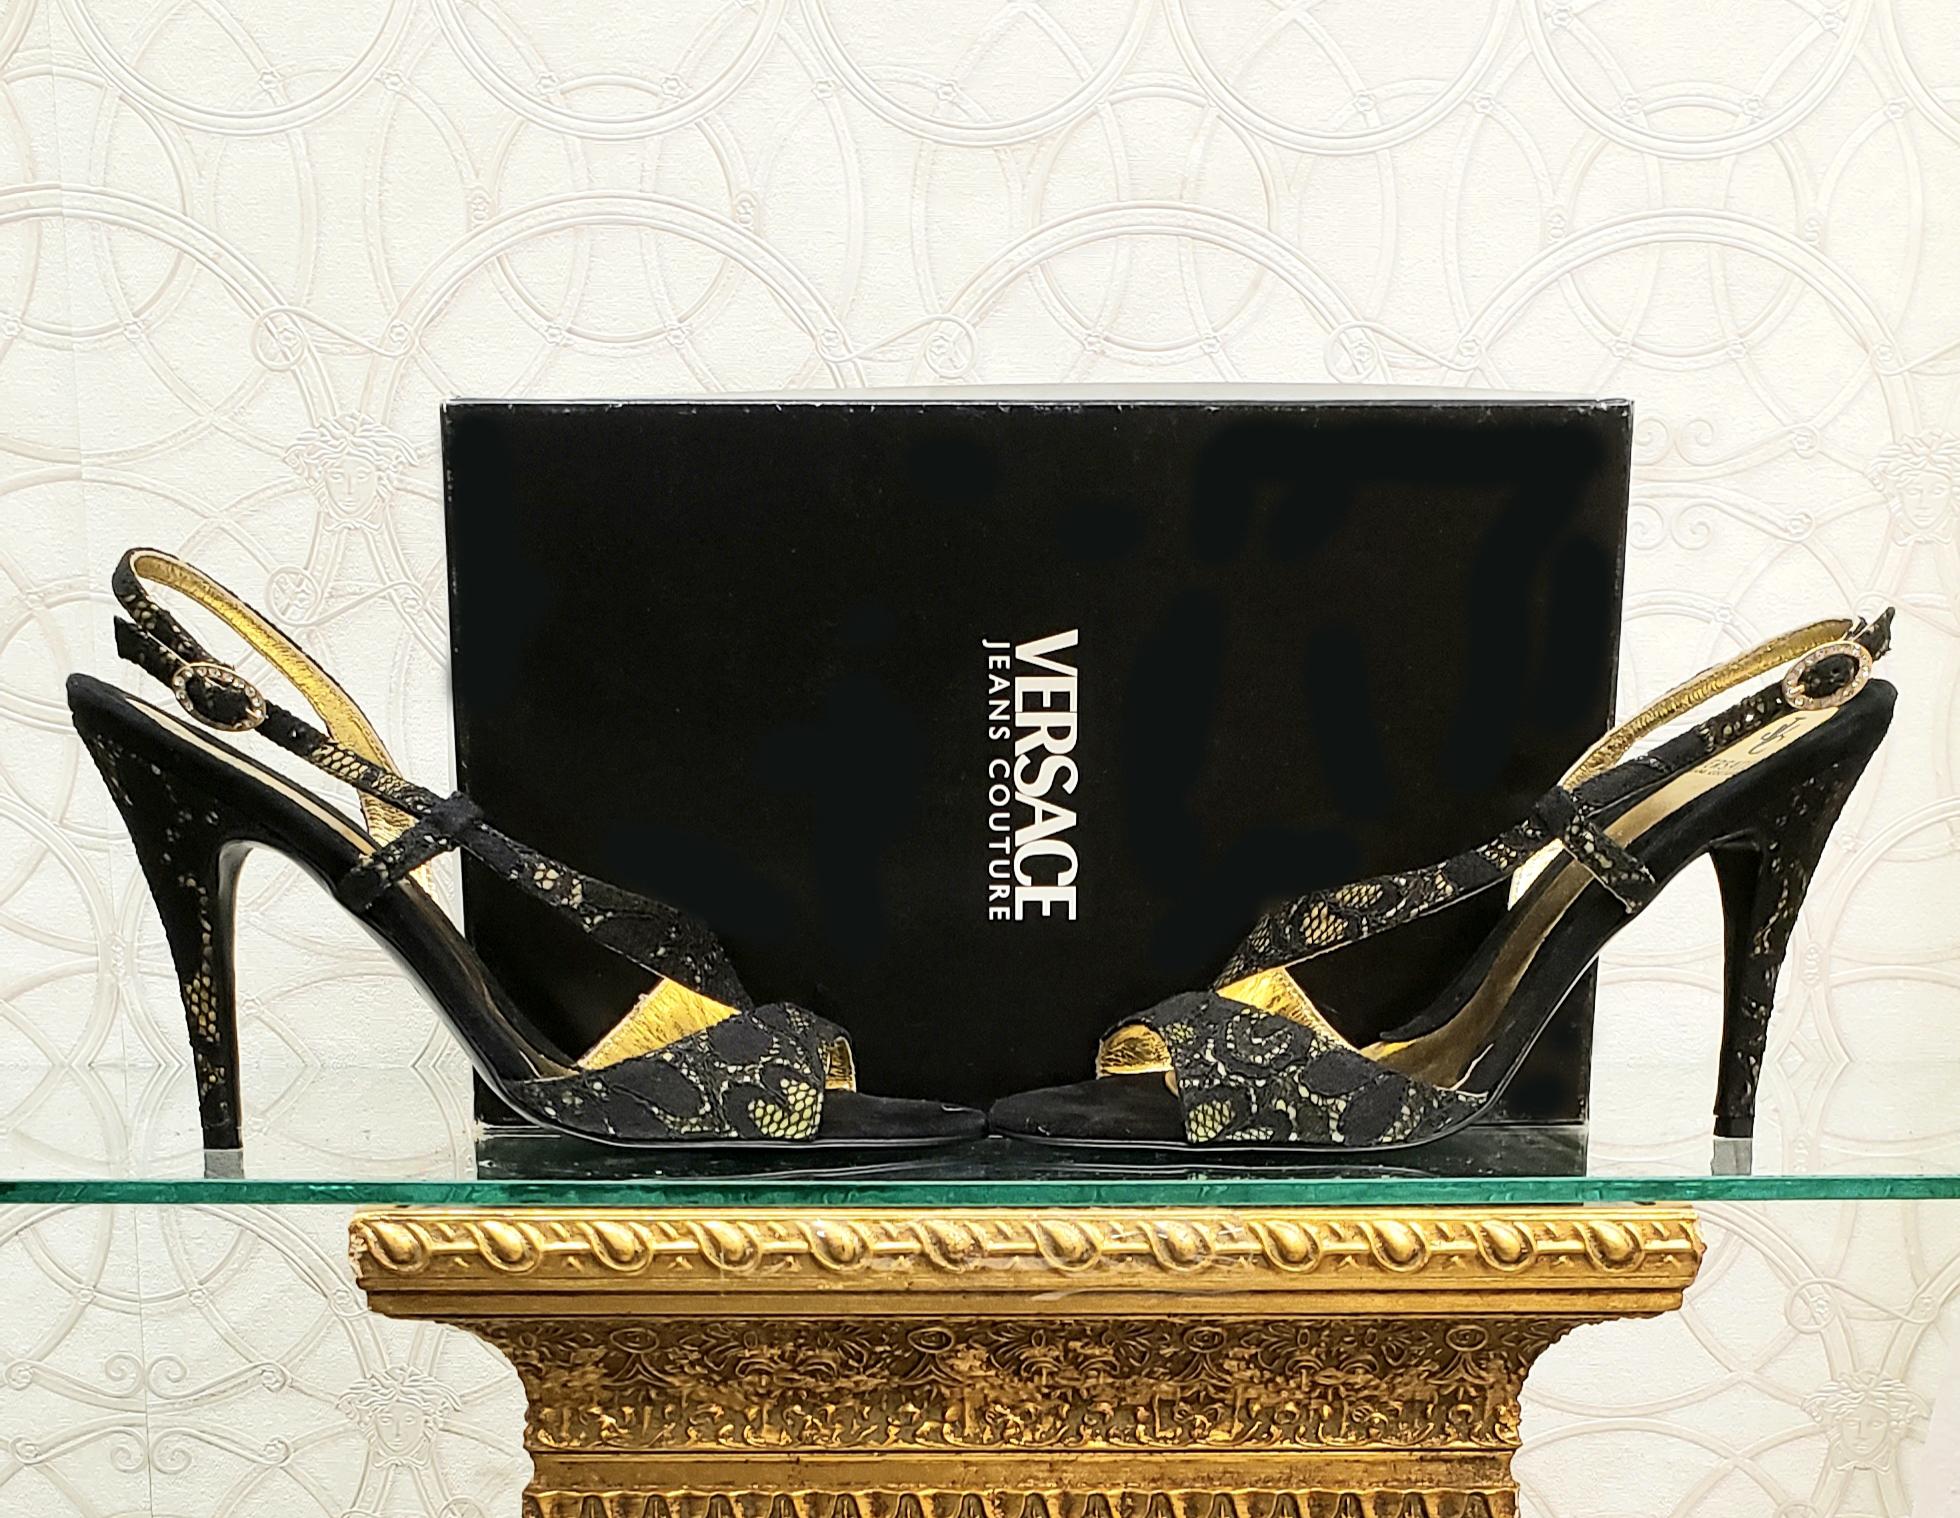 VERSACE 
Jeans Couture Collection 
Singback sandals
Color: Black and Gold
Satin and Lace
Rhinestone buckle
4.25